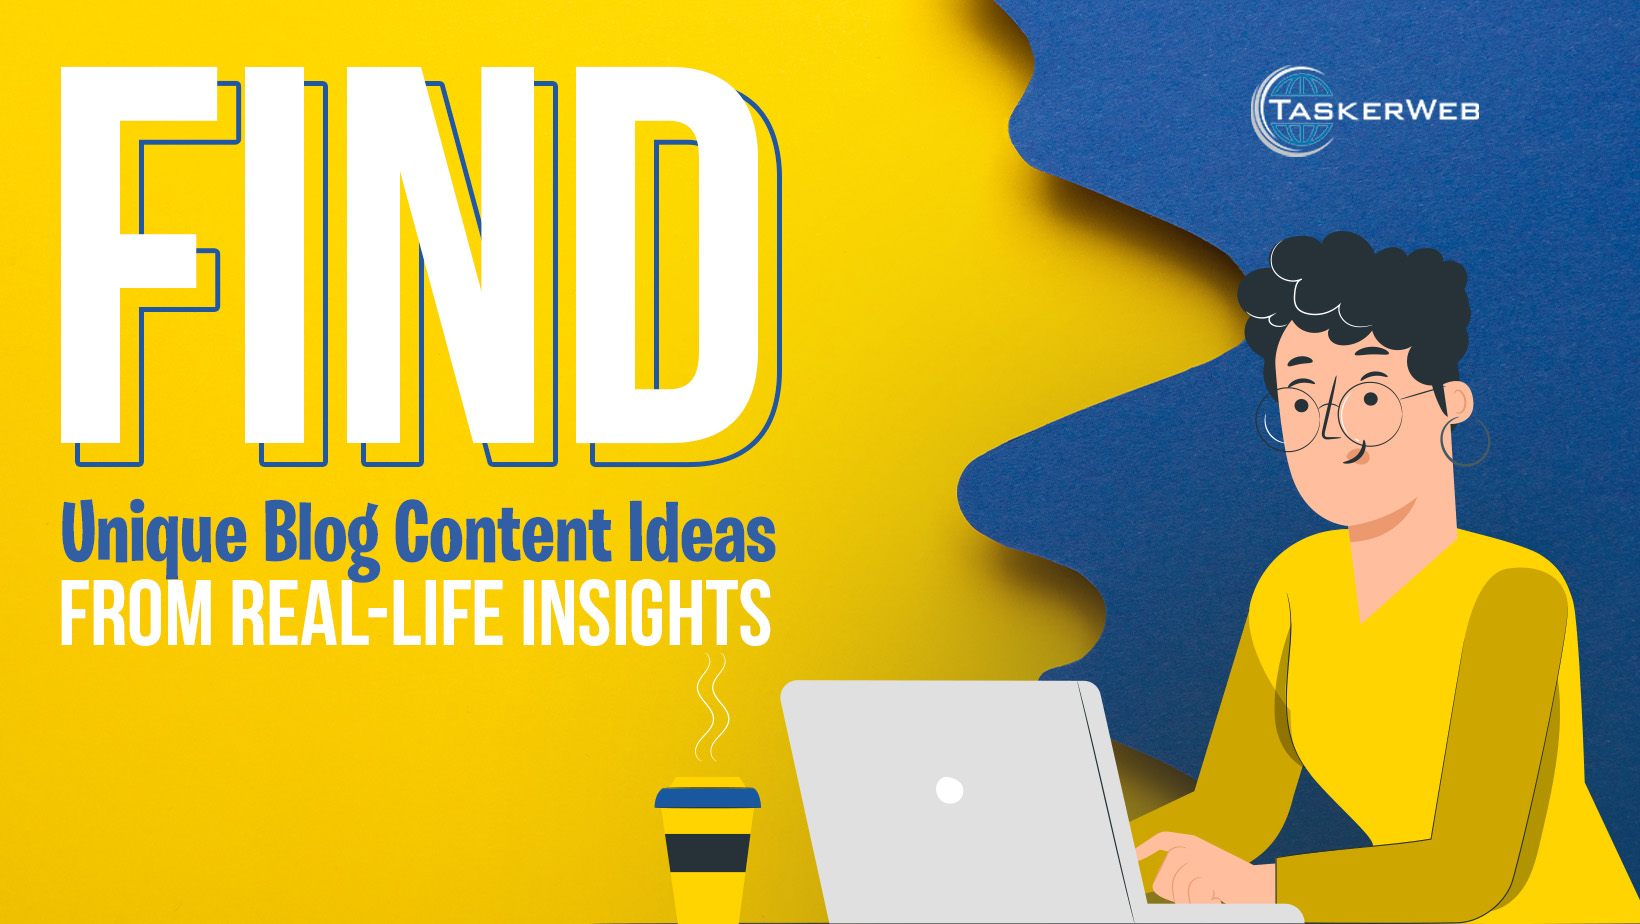 Find Unique Blog Content Ideas From Real-Life Insights